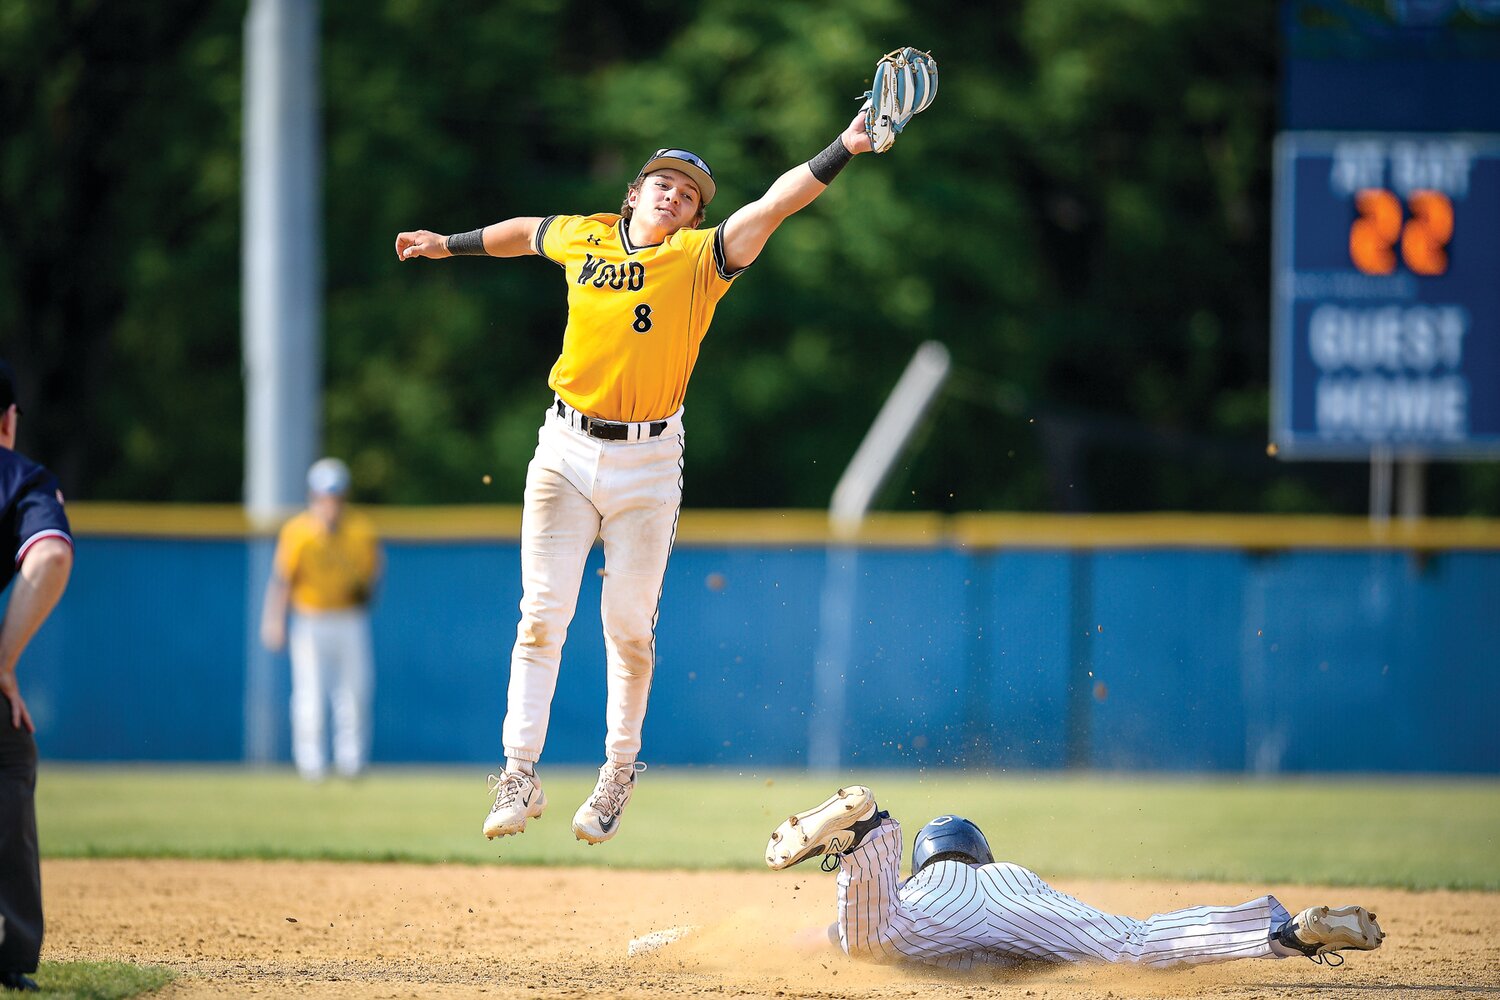 Archbishop Wood shortstop Patrick Gozdan leaps to catch a throw from catcher Logan Madison as Dallas’ Kaden Coyne steals second base.